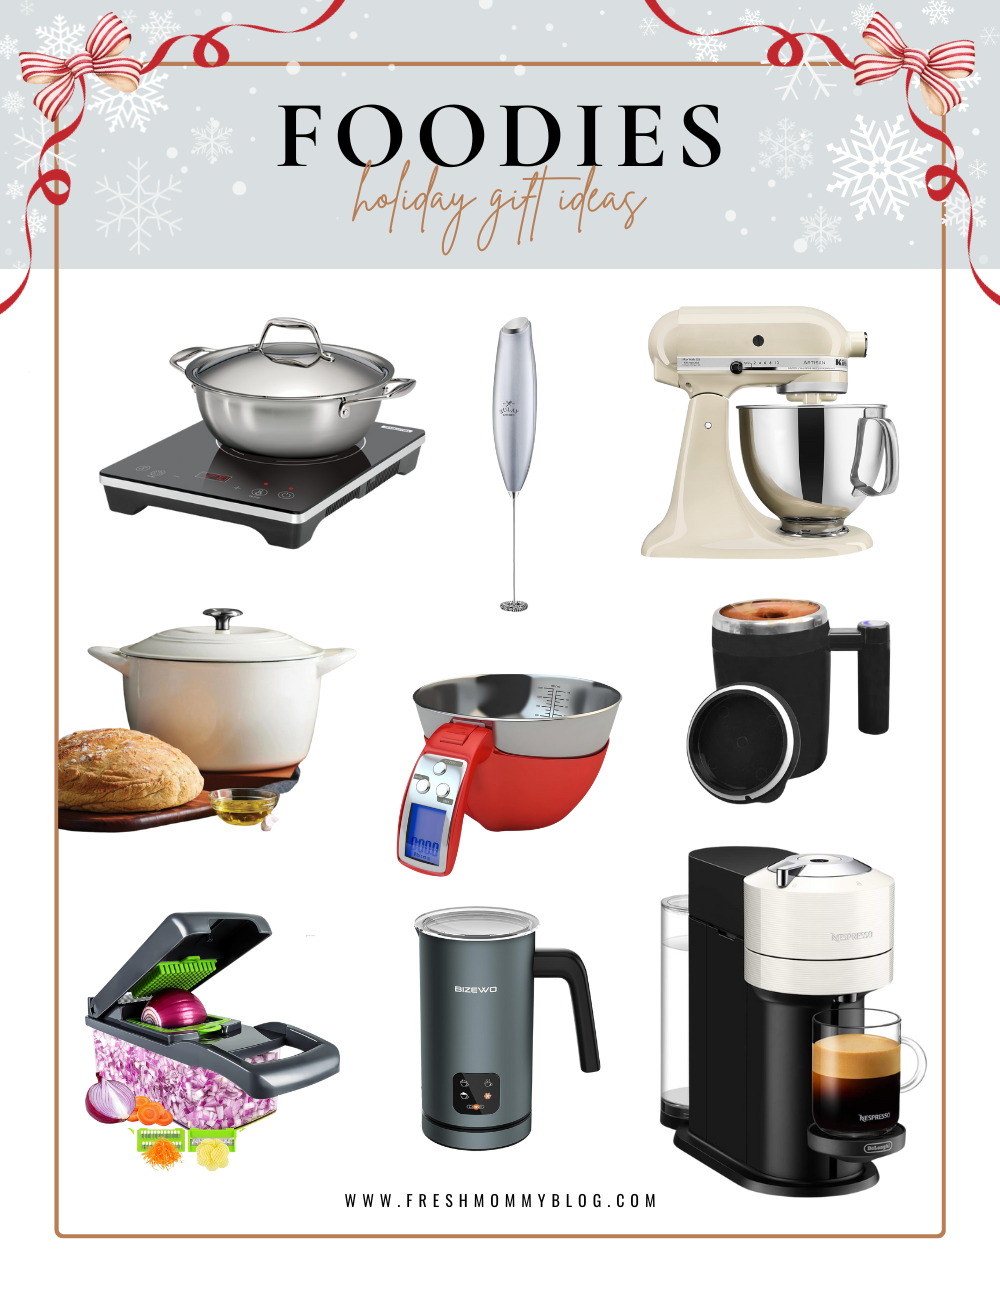 Foodie Gift Guide